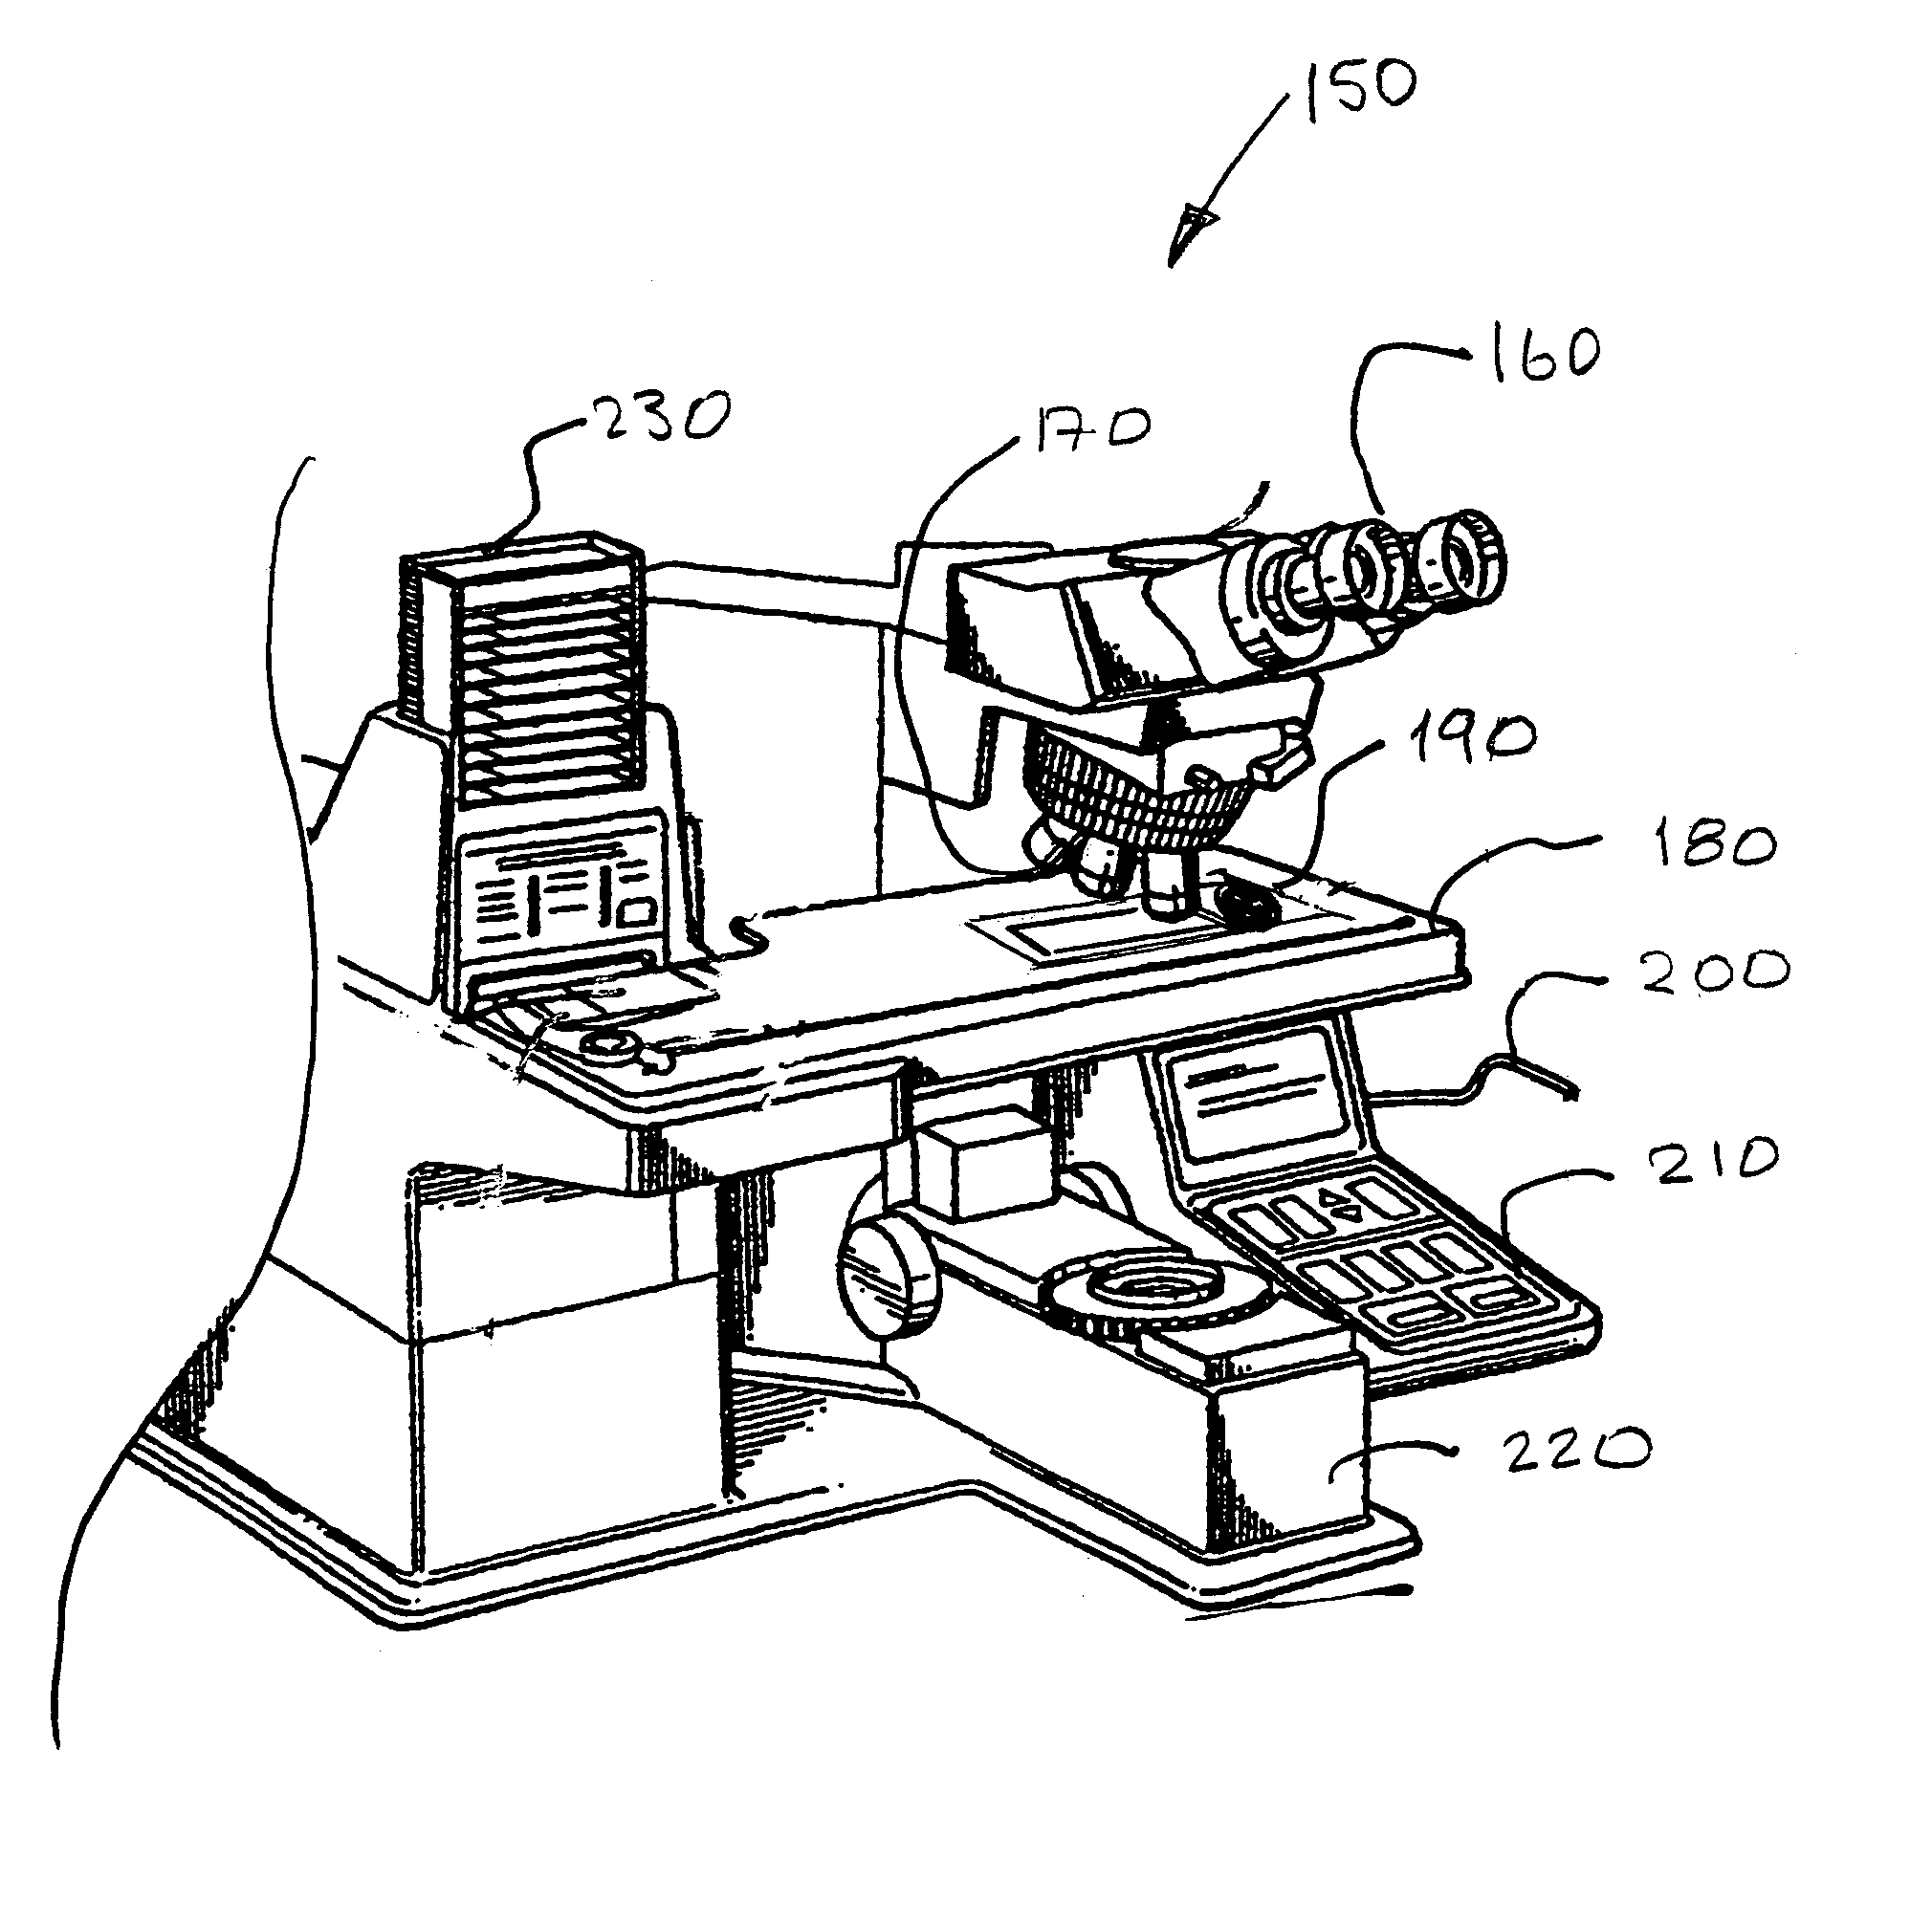 System for automatically locating and manipulating positions on an object